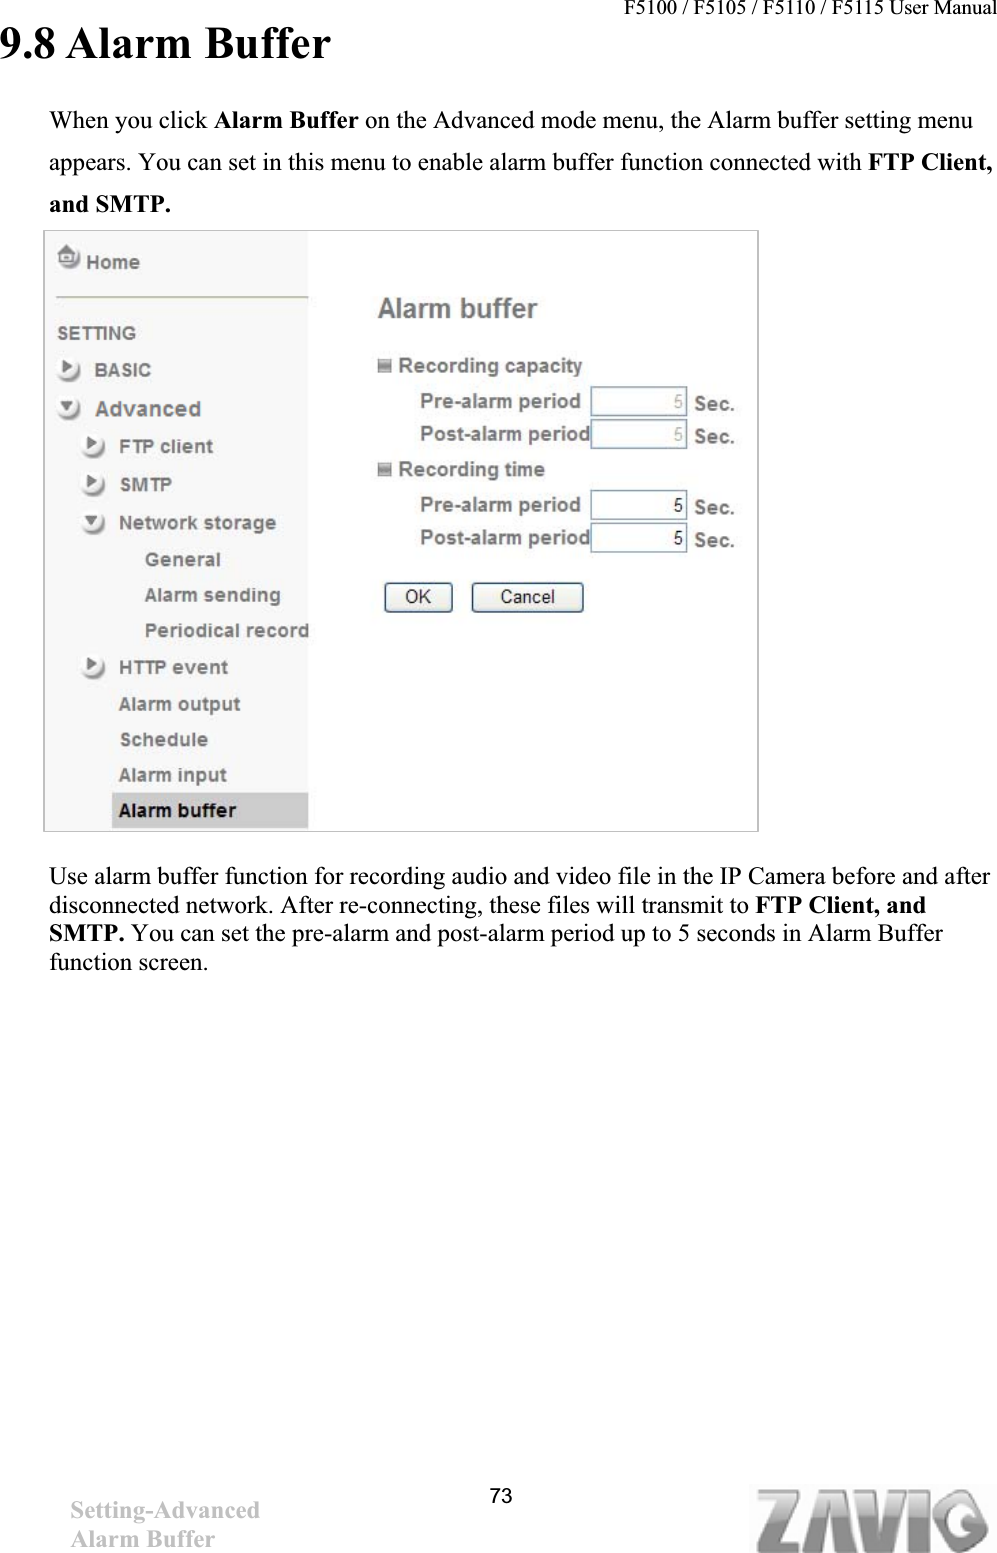 F5100 / F5105 / F5110 / F5115 User Manual                                                                           9.8 Alarm Buffer   When you click Alarm Buffer on the Advanced mode menu, the Alarm buffer setting menu appears. You can set in this menu to enable alarm buffer function connected with FTP Client, and SMTP.Use alarm buffer function for recording audio and video file in the IP Camera before and after disconnected network. After re-connecting, these files will transmit to FTP Client, and SMTP. You can set the pre-alarm and post-alarm period up to 5 seconds in Alarm Buffer function screen. 73Setting-AdvancedAlarm Buffer 